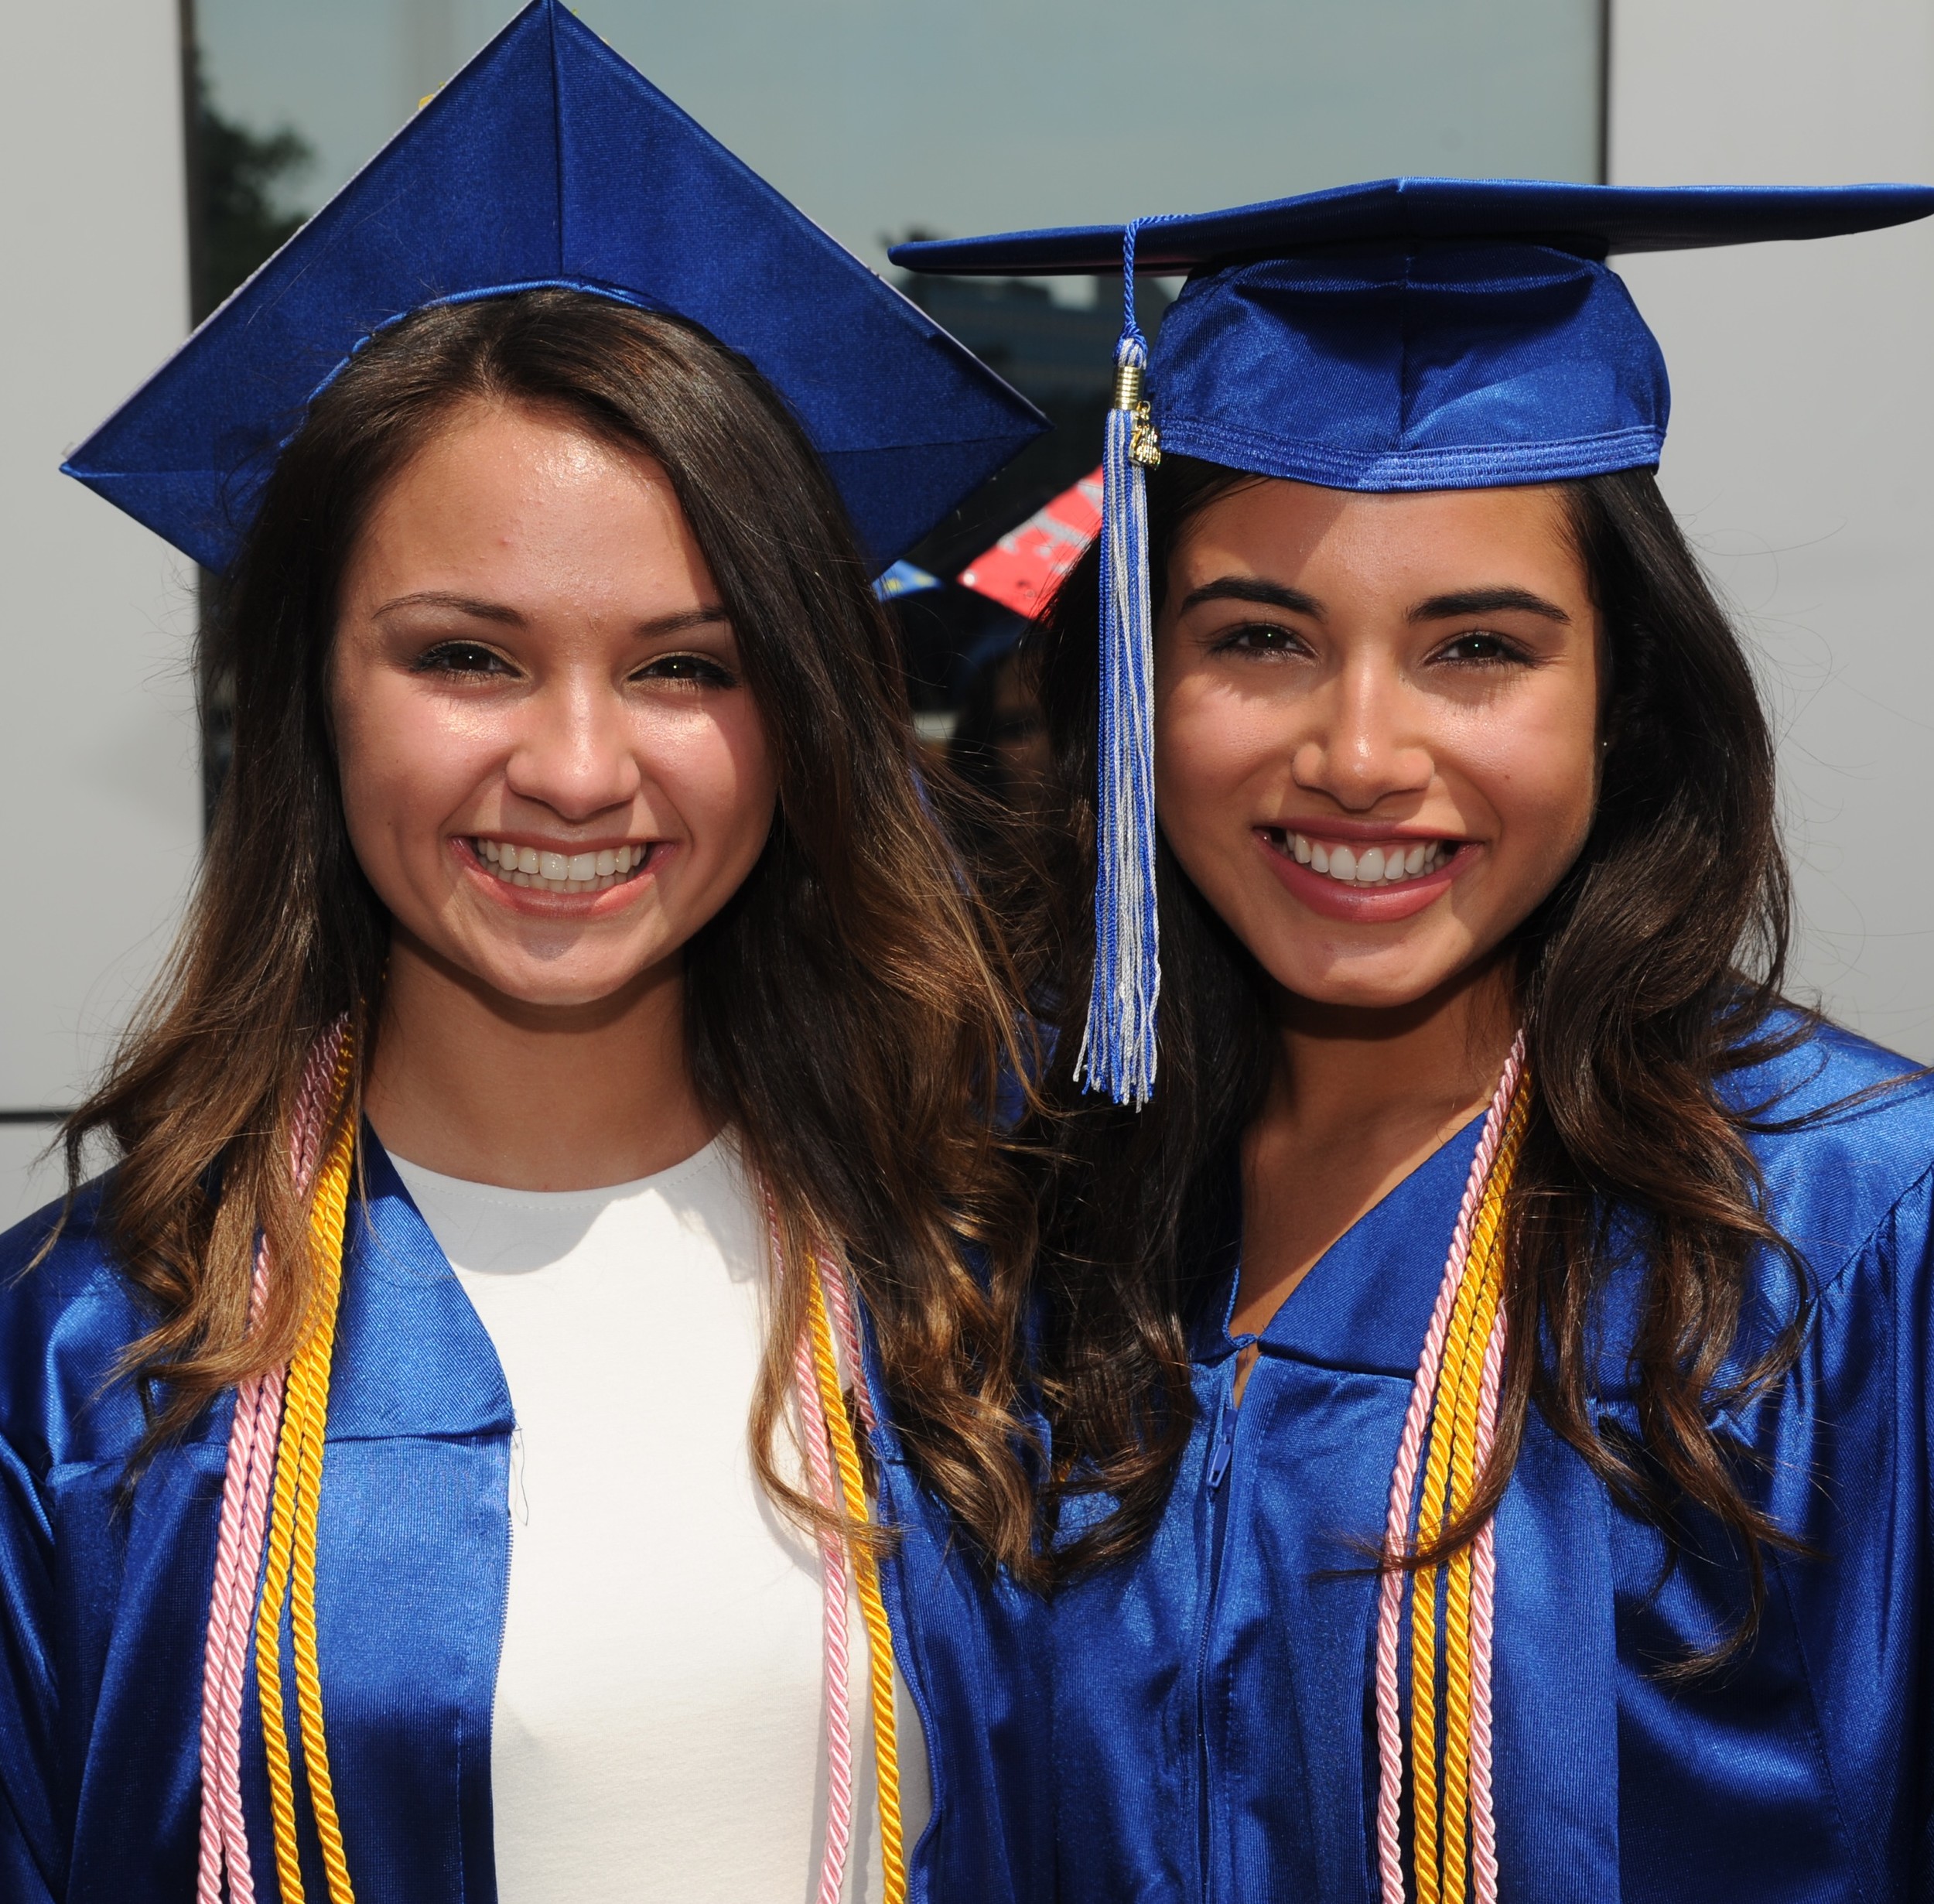 Graduating Seniors Allie Soel, 17, and Maribel Sabino,18, smiled from ear to ear during their graduation ceremony.